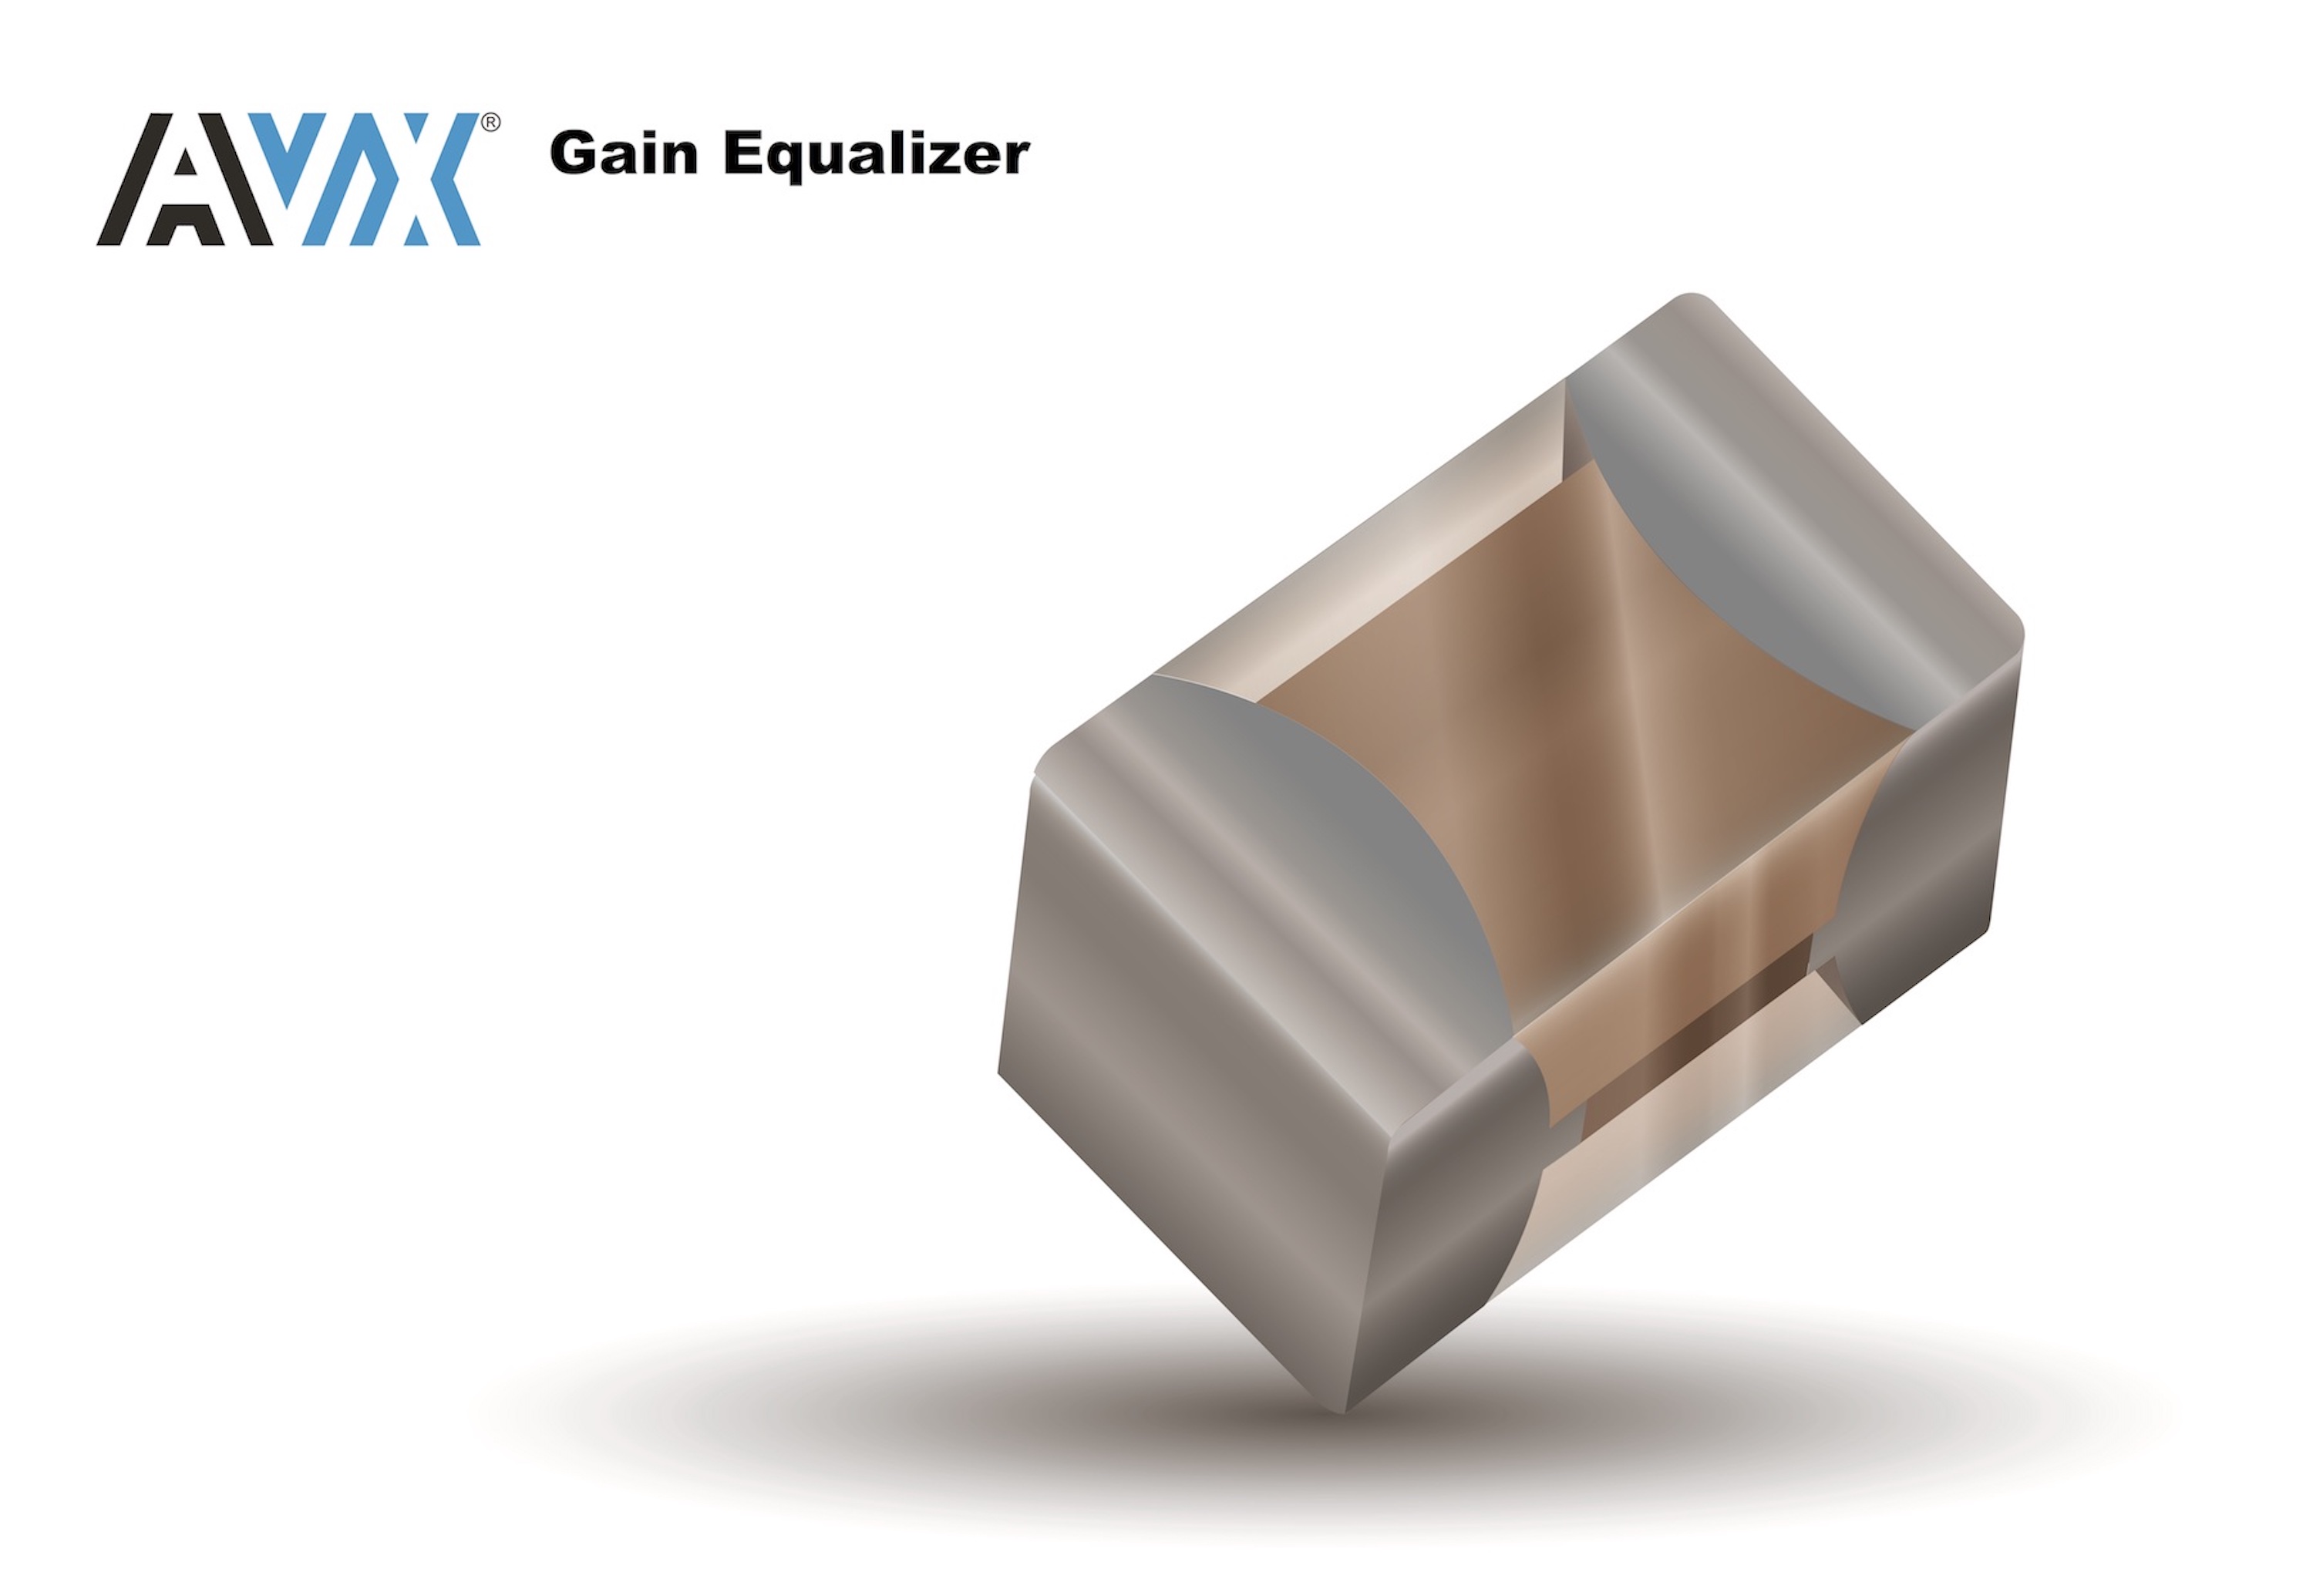 RC Equalizers Deliver Reliable, Tight-Tolerance Performance